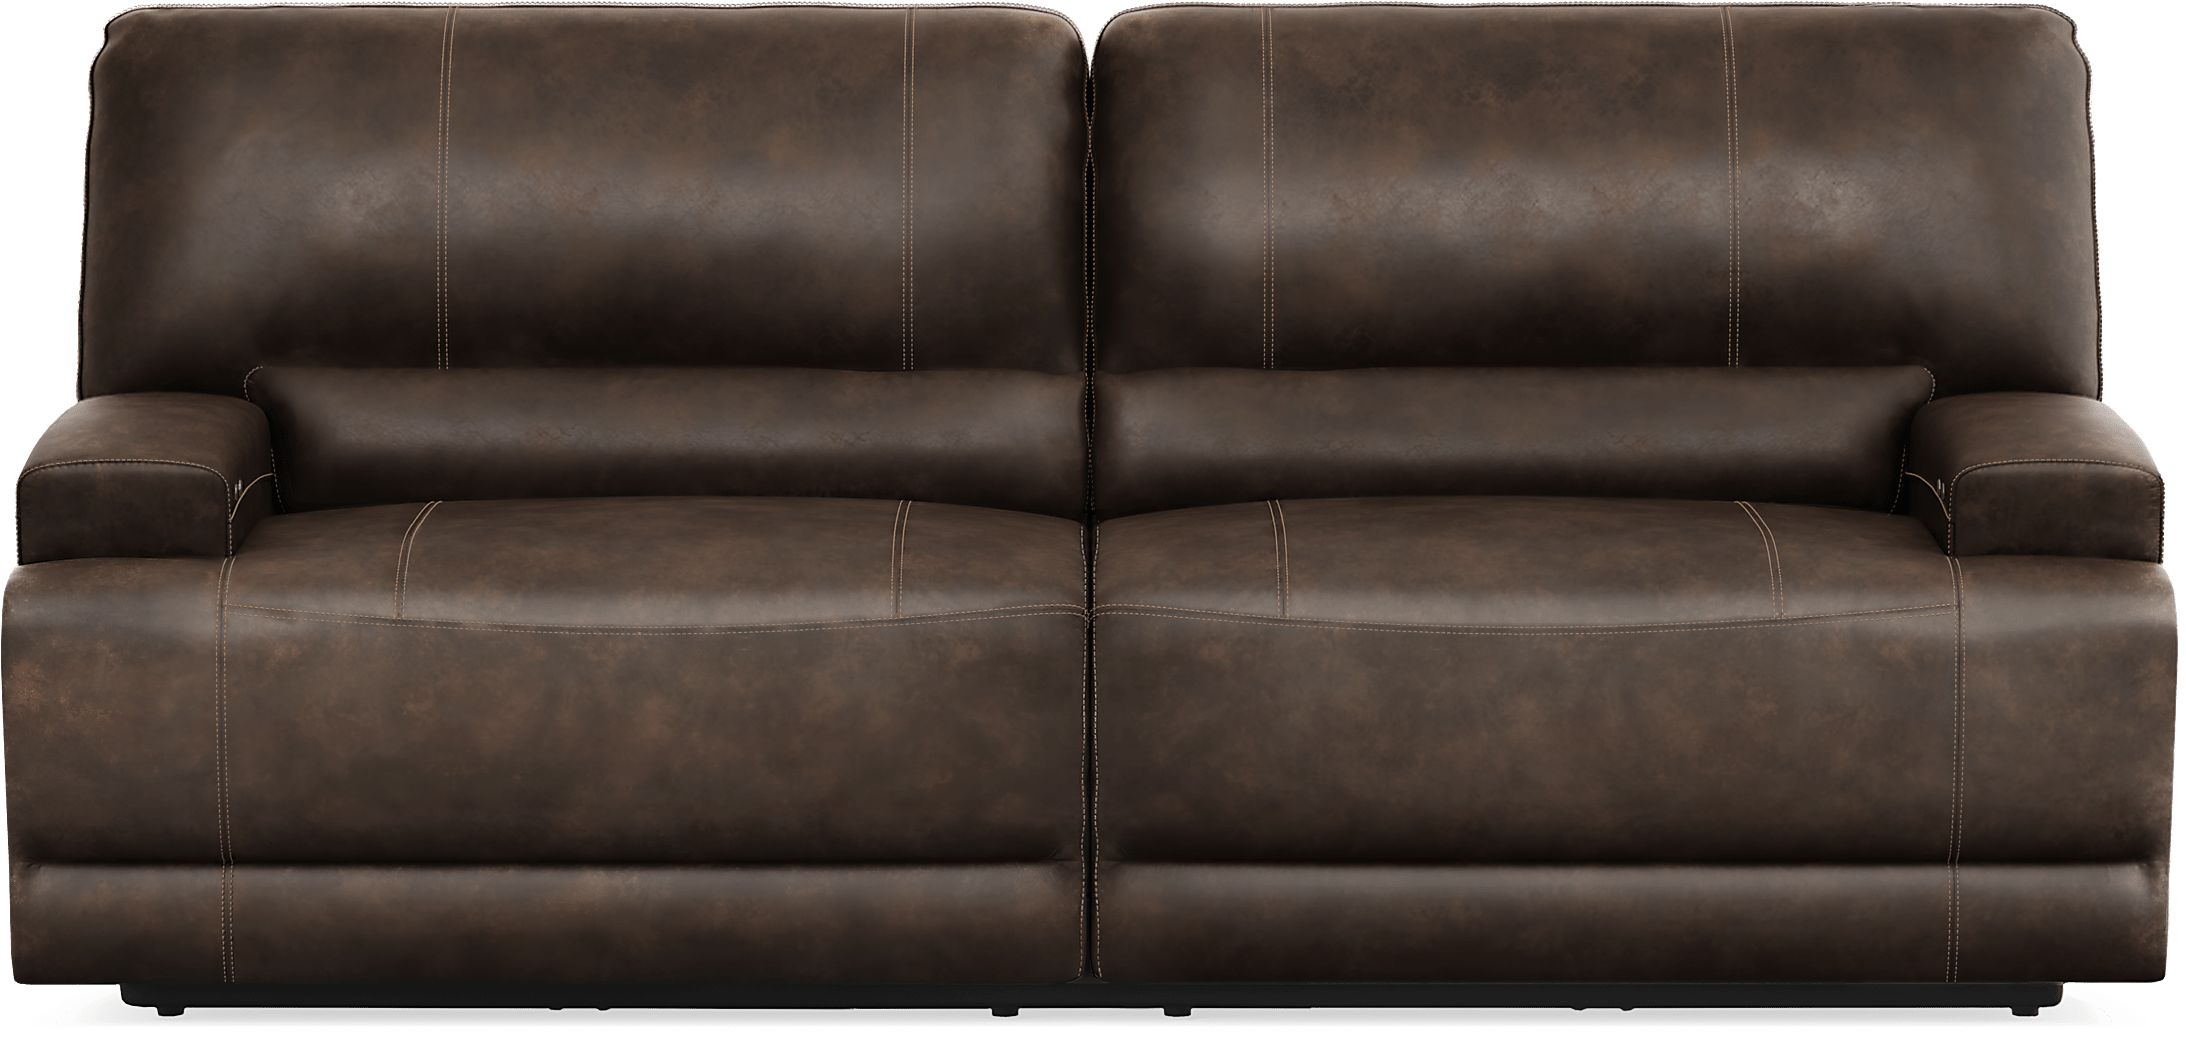 Warrendale Chocolate 8 Pc Power Reclining Living Room